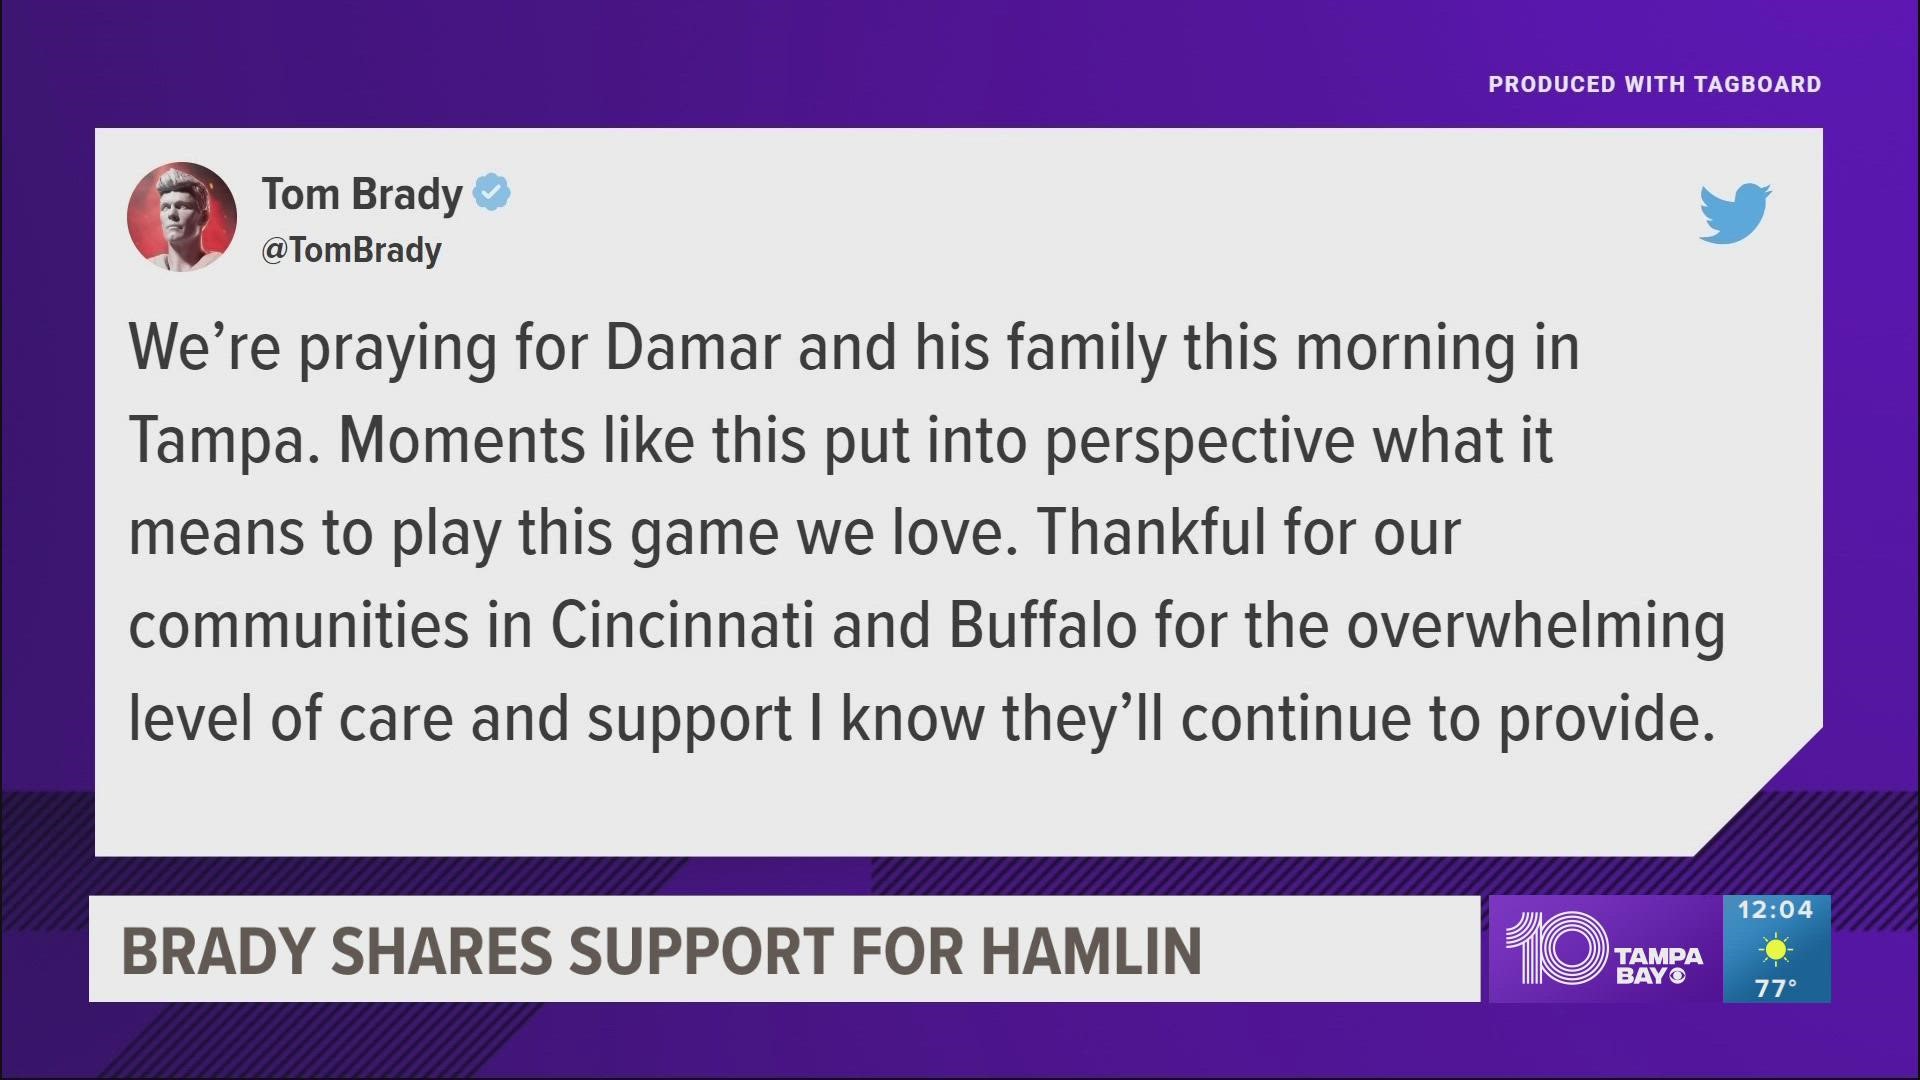 The Buffalo Bills tweeted early Tuesday morning that Damar Hamlin suffered a cardiac arrest following a tackle in the game.